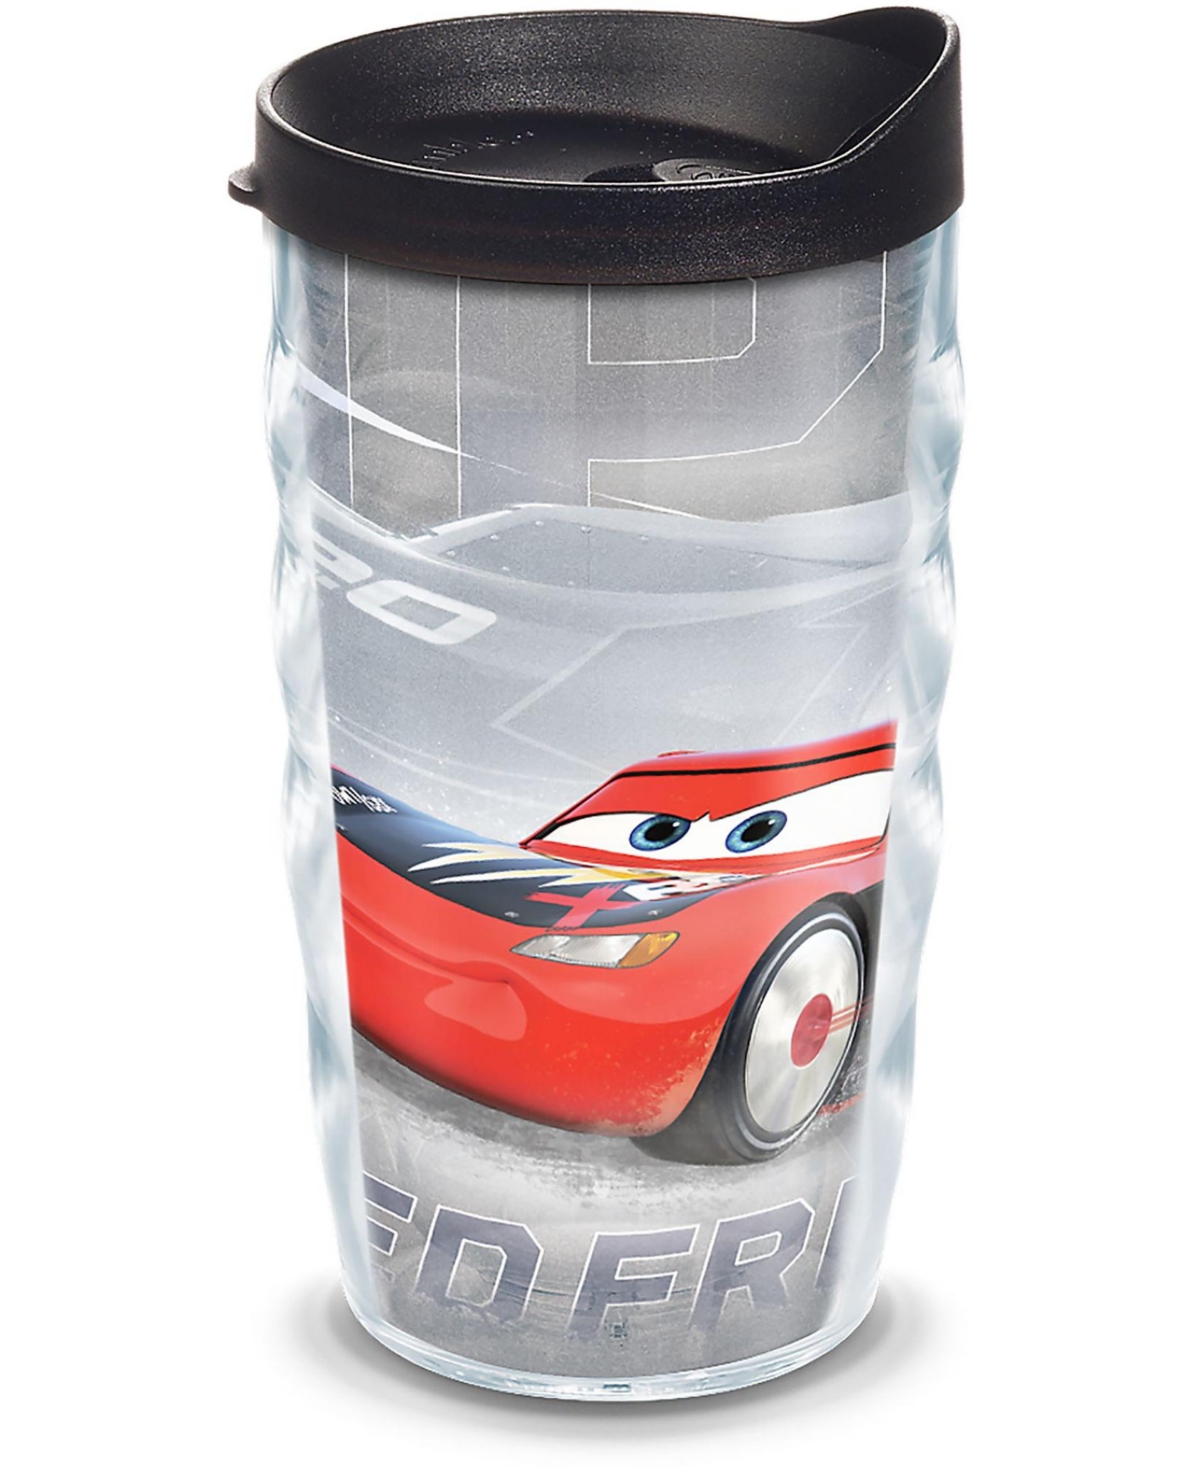 Tervis Tumbler Tervis Disney Pixar - Cars Speed Frenzy Made In Usa Double Walled Insulated Tumbler Travel Cup Keeps In Open Miscellaneous